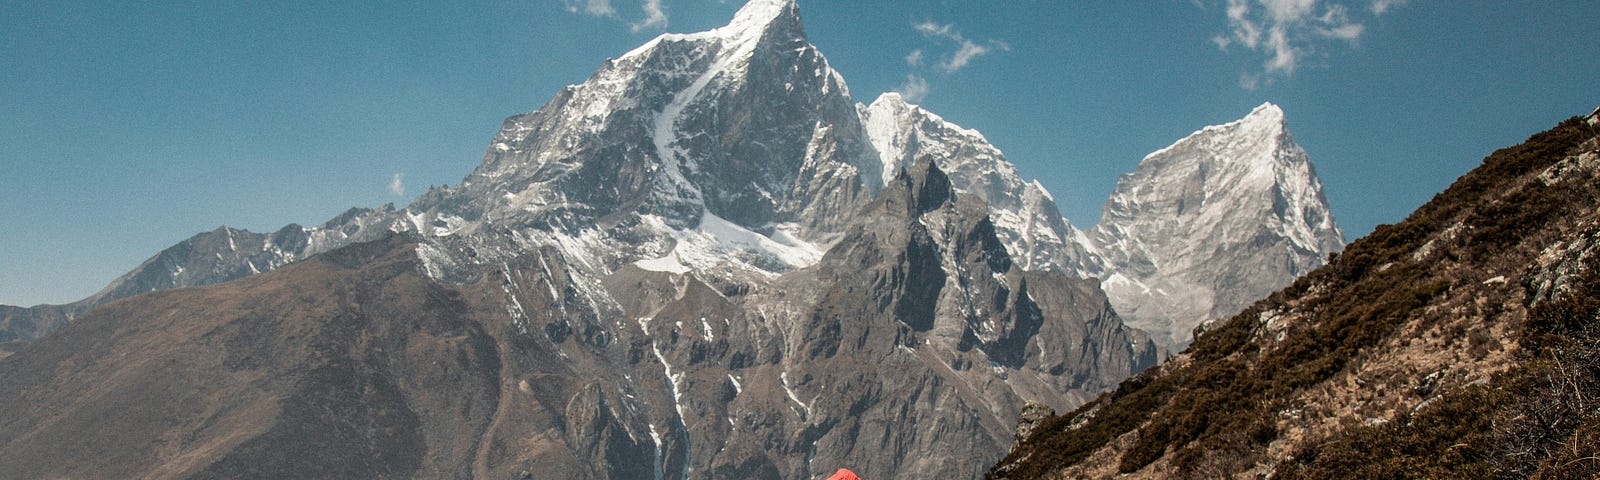 a mountain climber looks at the peak of Mt. Everest